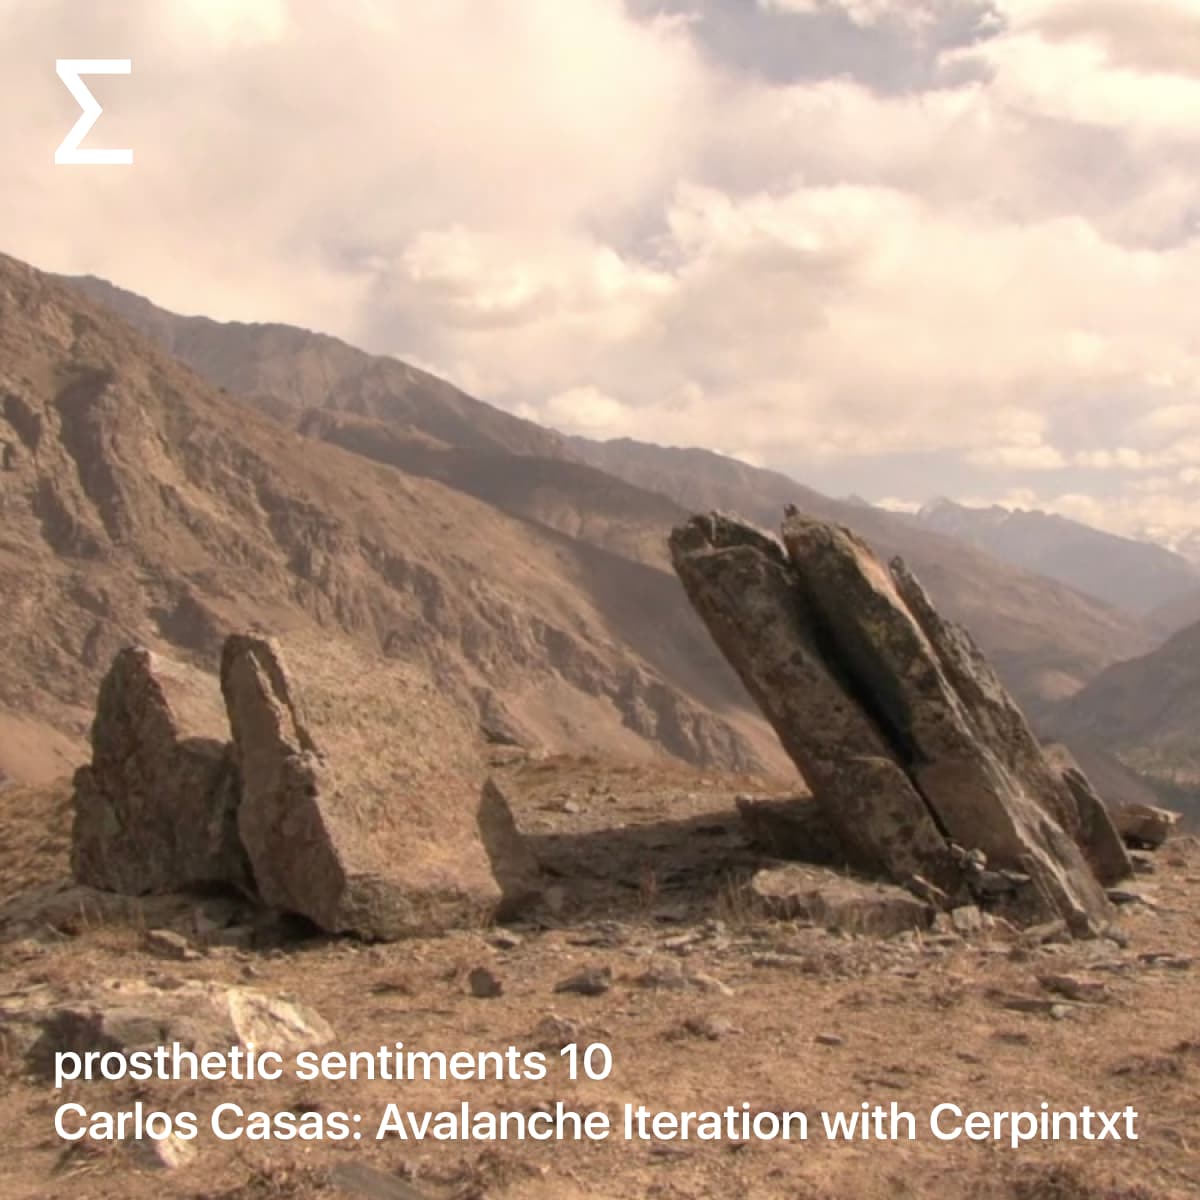 prosthetic sentiments 10 – Carlos Casas: Avalanche Iteration with Cerpintxt